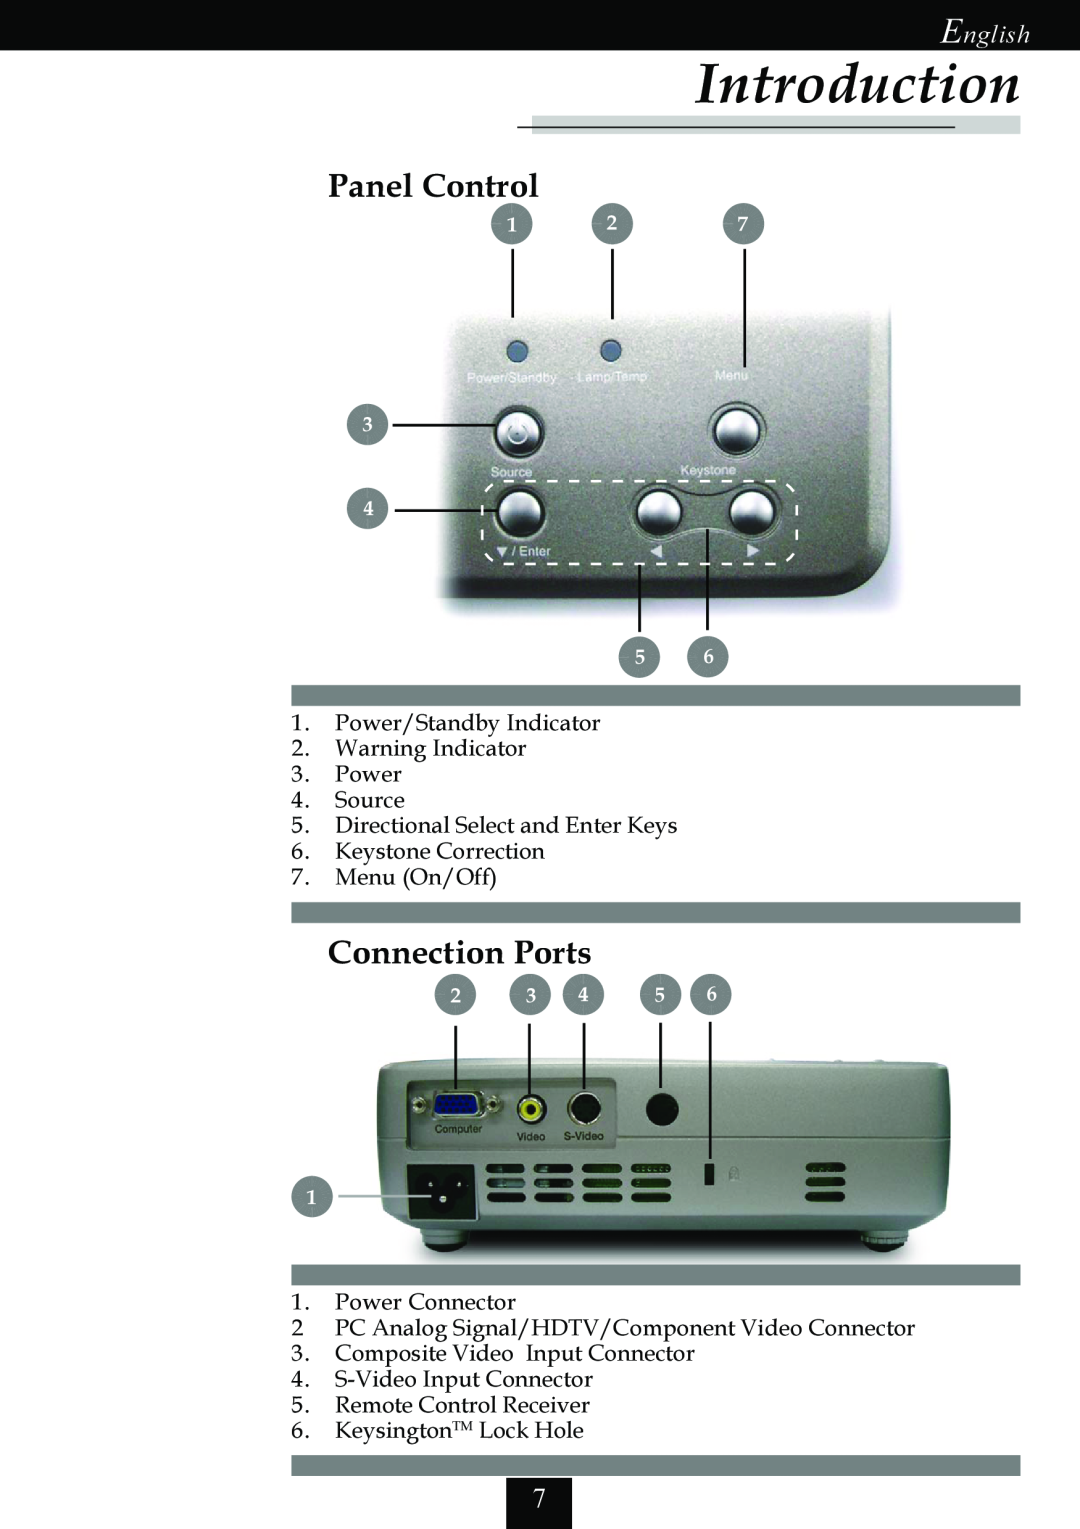 Optoma Technology EP725 specifications Panel Control, Connection Ports, Introduction, English, 2 3 4 5 